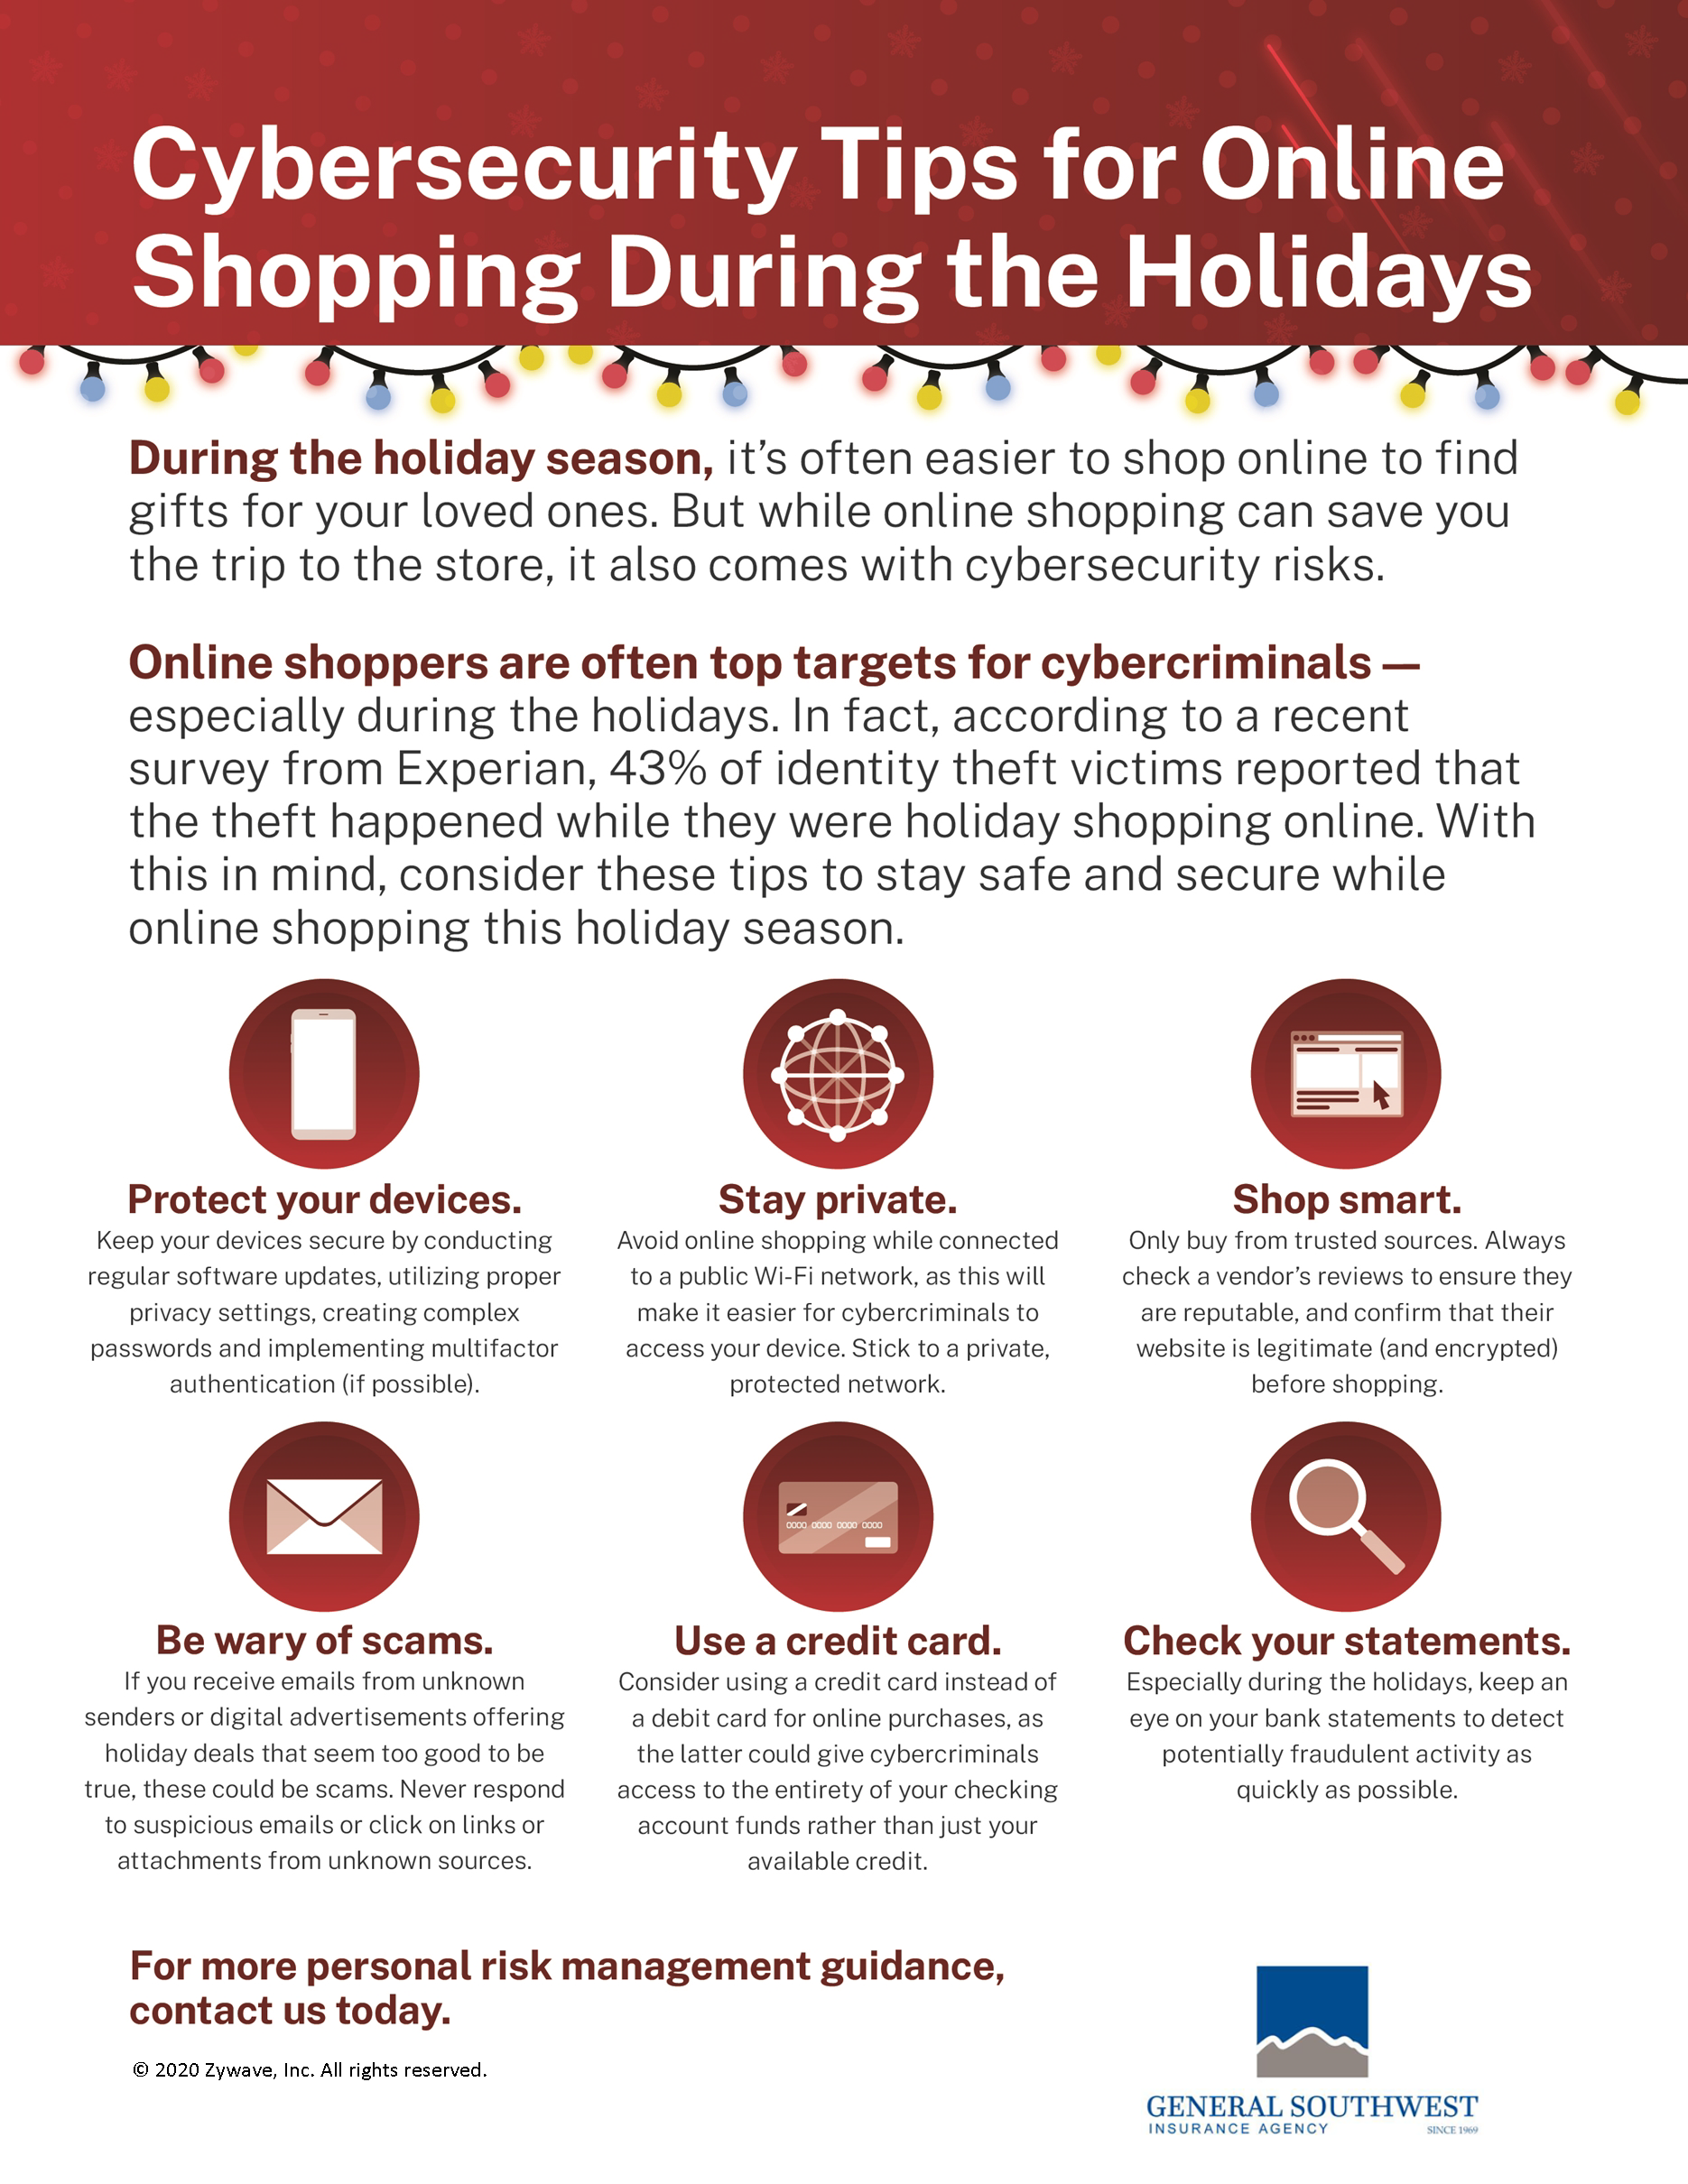 cybersecurity shopping tips